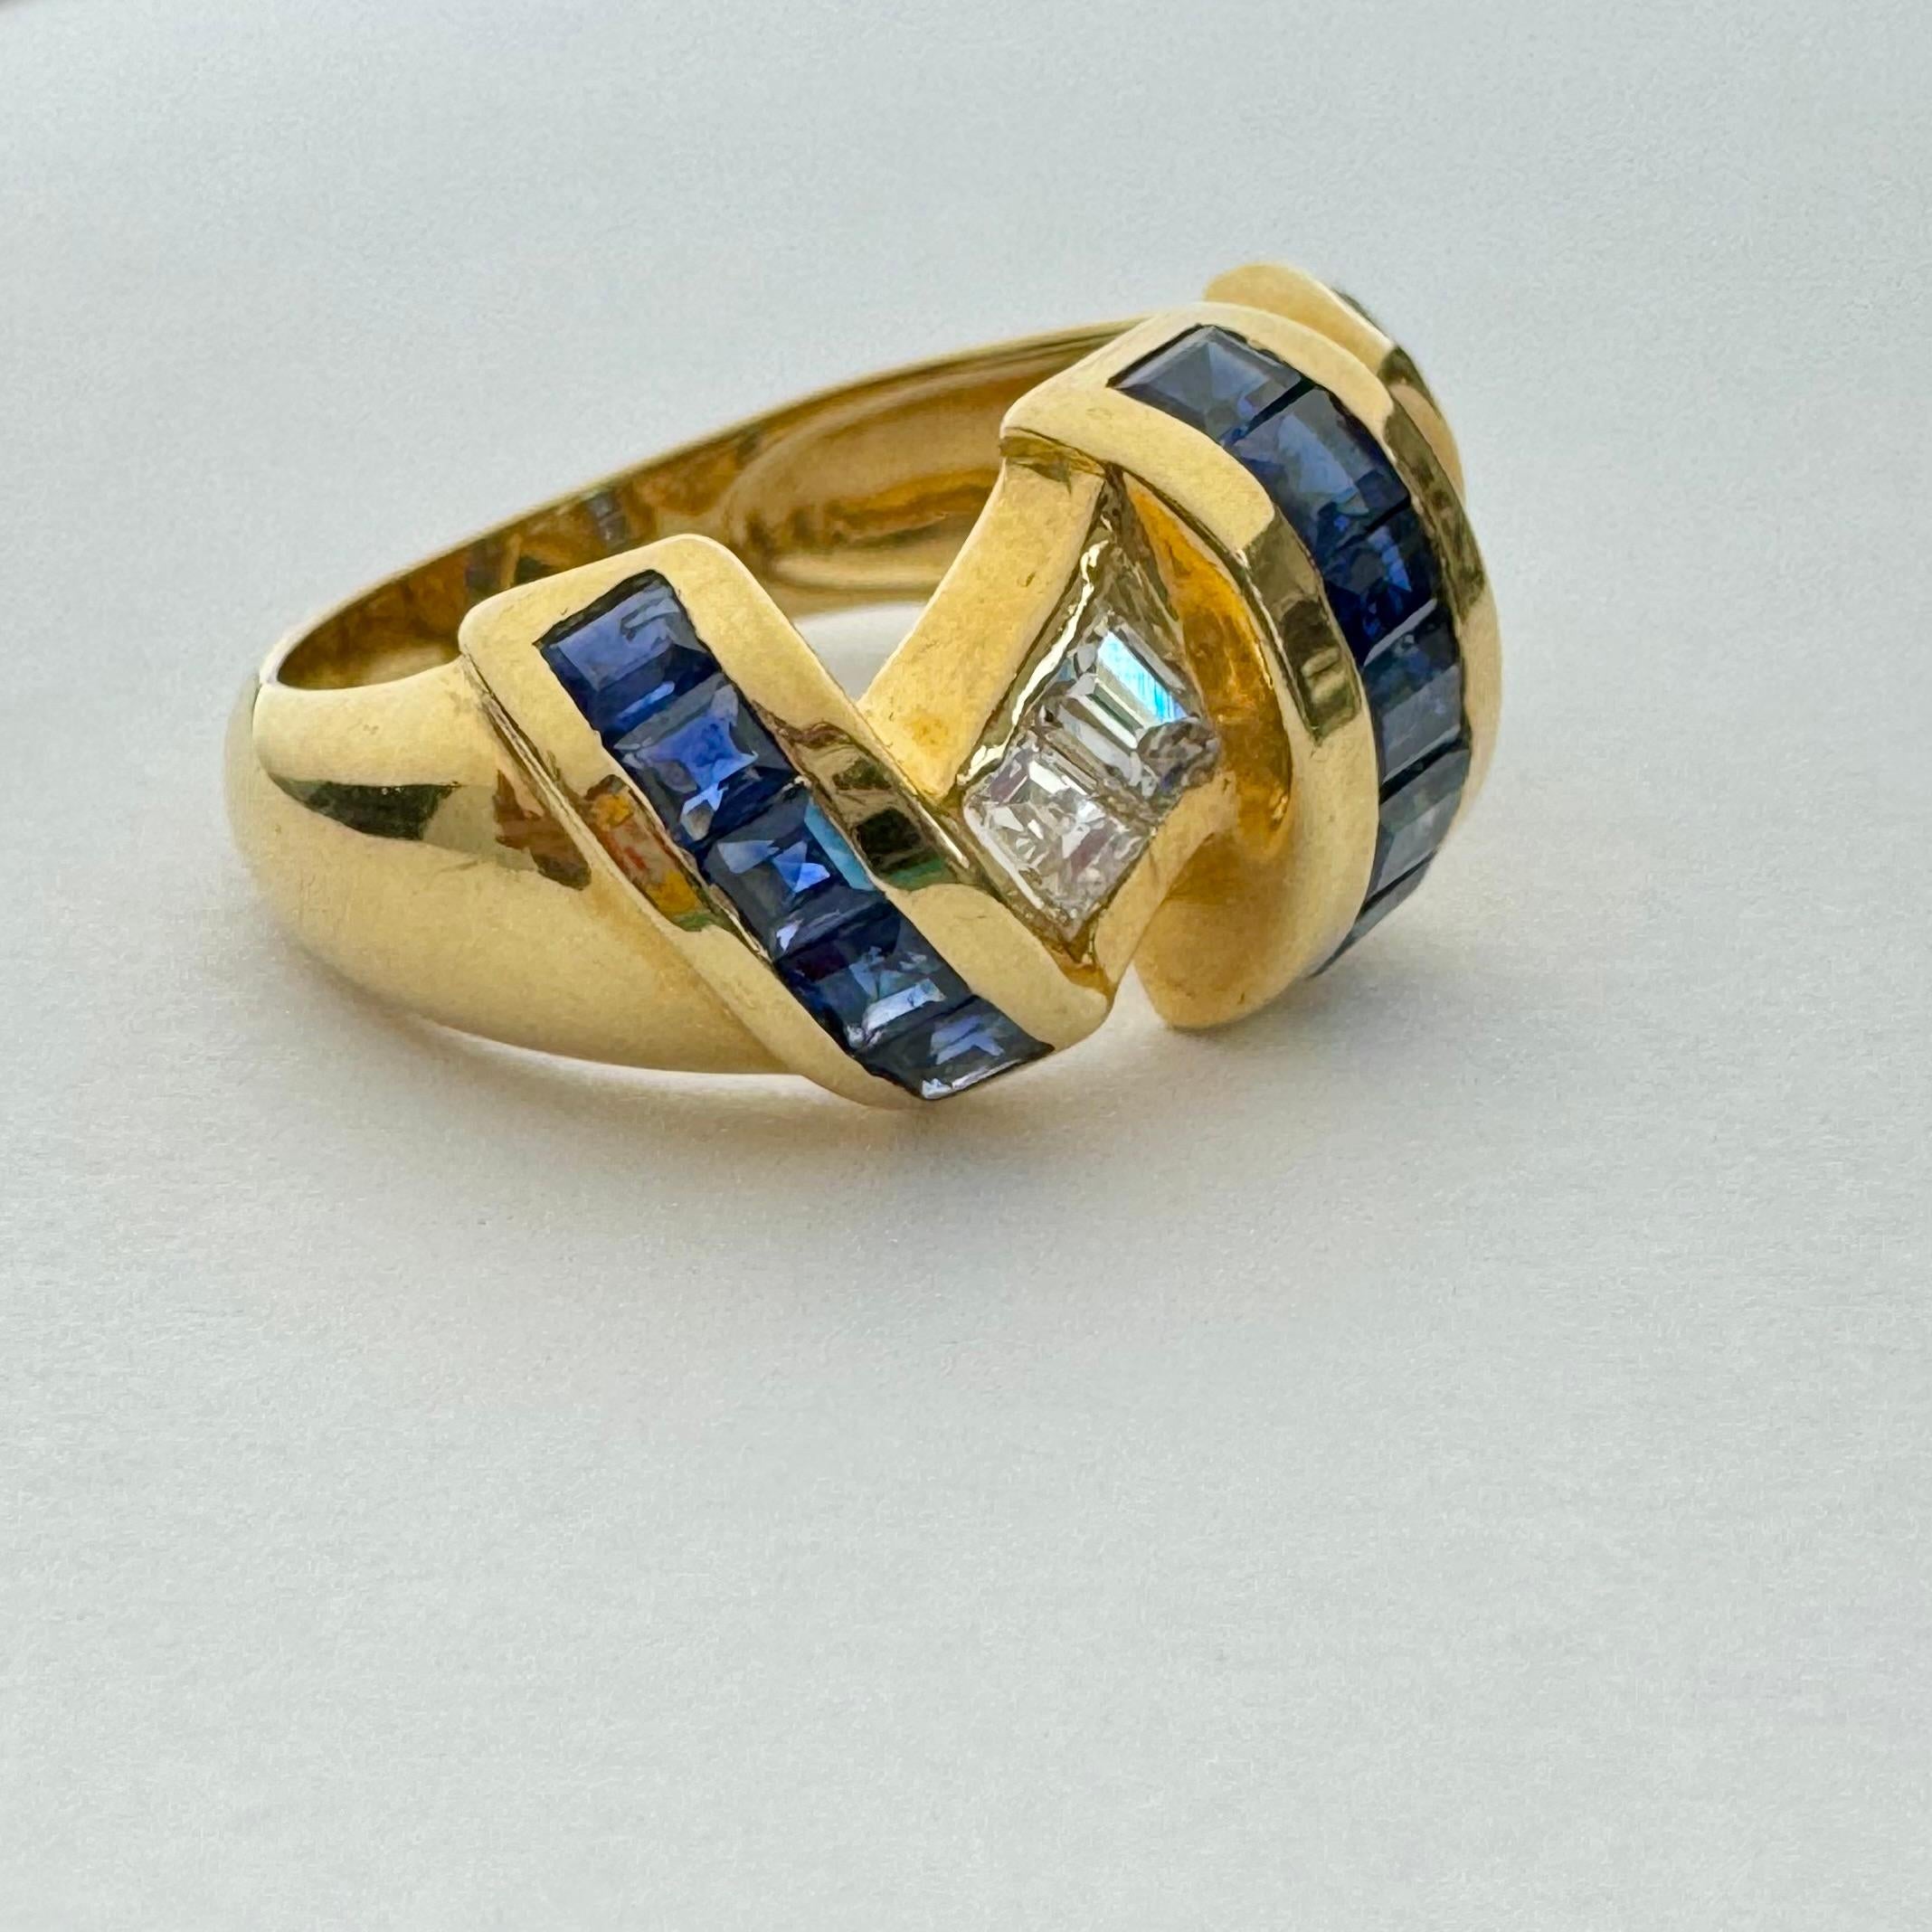 Elegant and unique sapphire and diamond ring, set in sold 18k yellow gold.
The ring's ribbon design is created with expertly channel set of brilliant blue step cut sapphire and sparkling white diamonds,
The sapphires weigh approximately 2.10cttw and